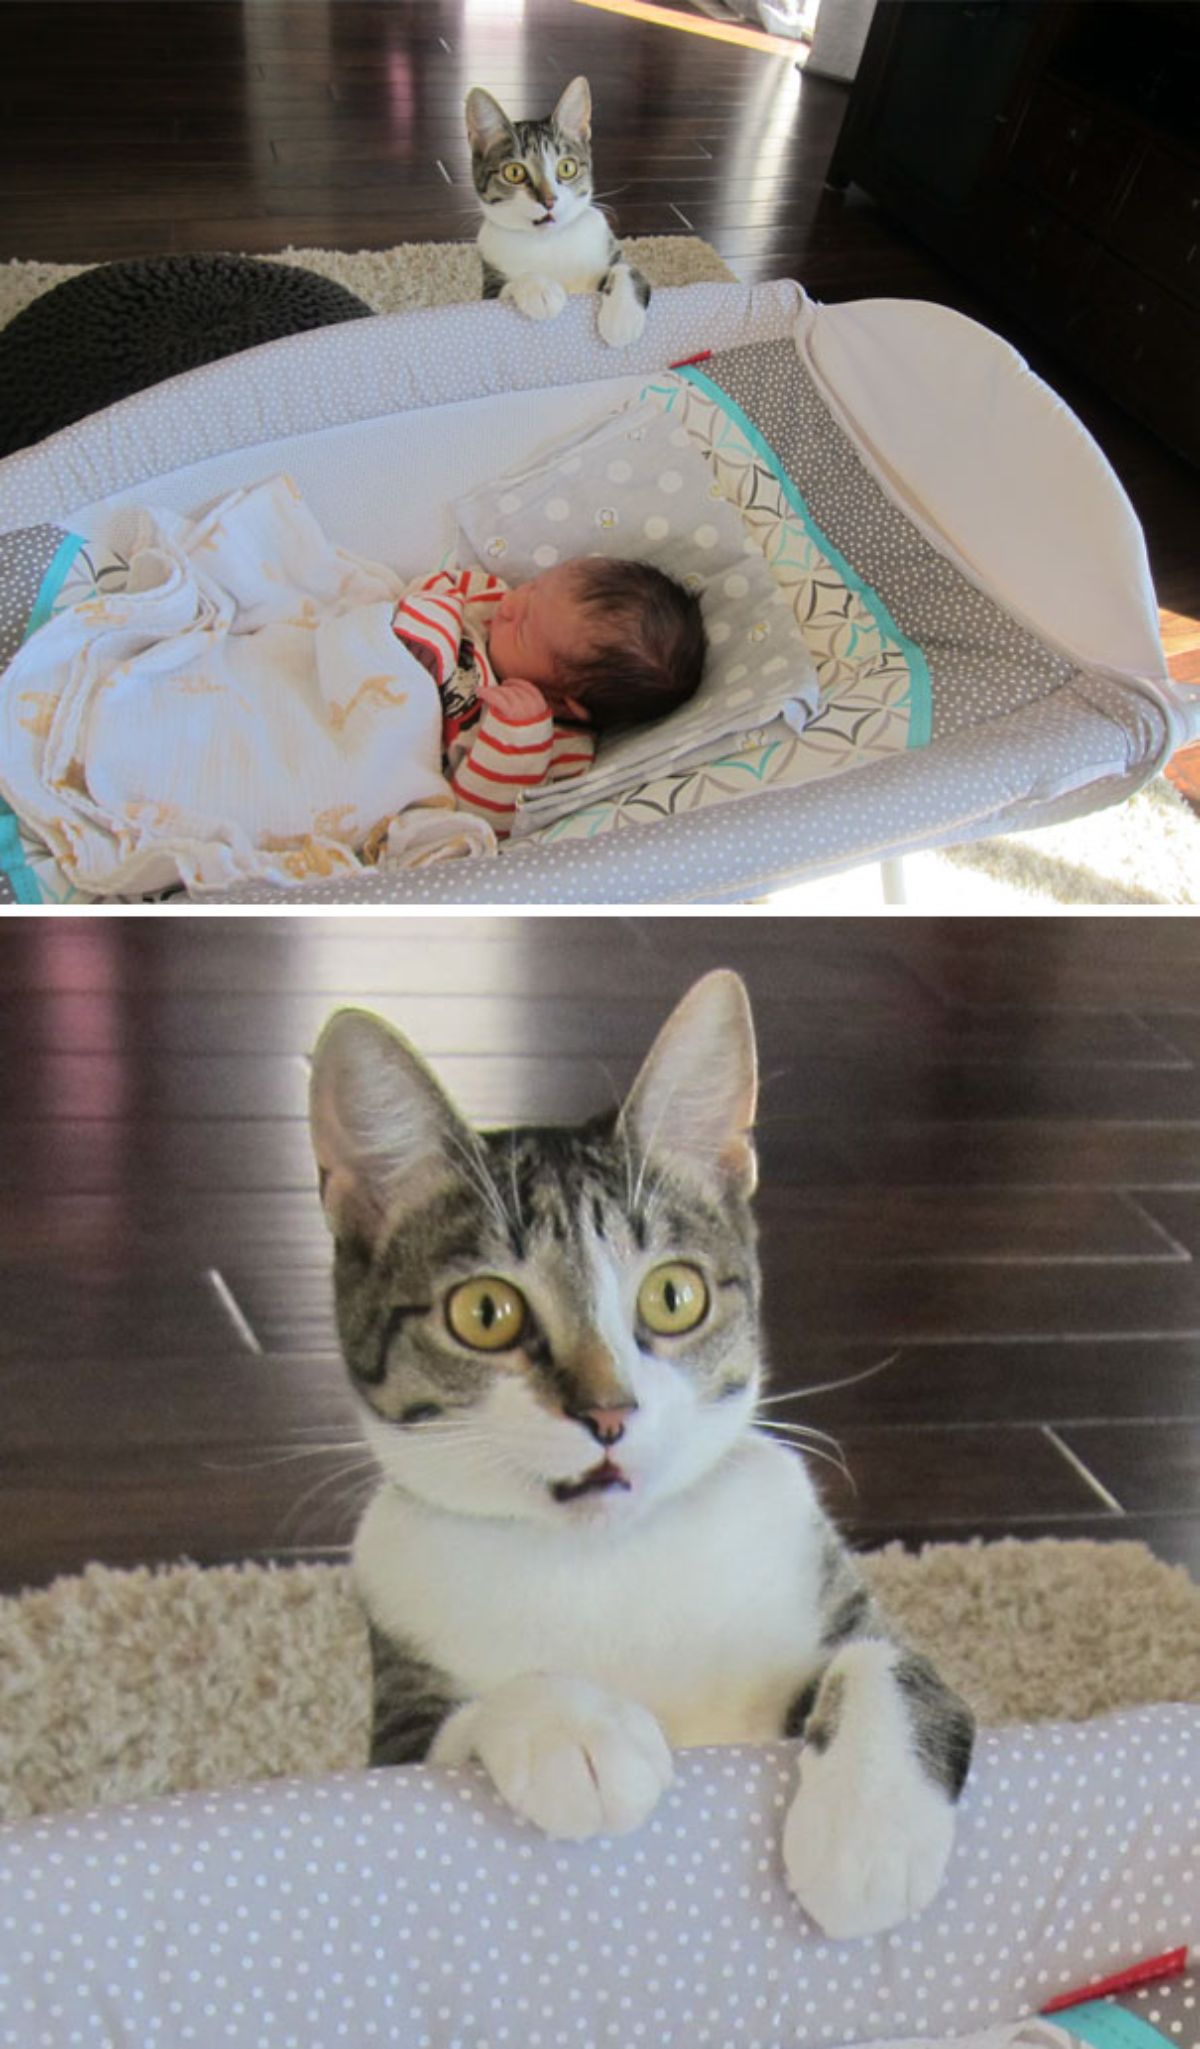 2 photos of a white and grey cat with two front legs on the corner of a bassinet with a baby in it